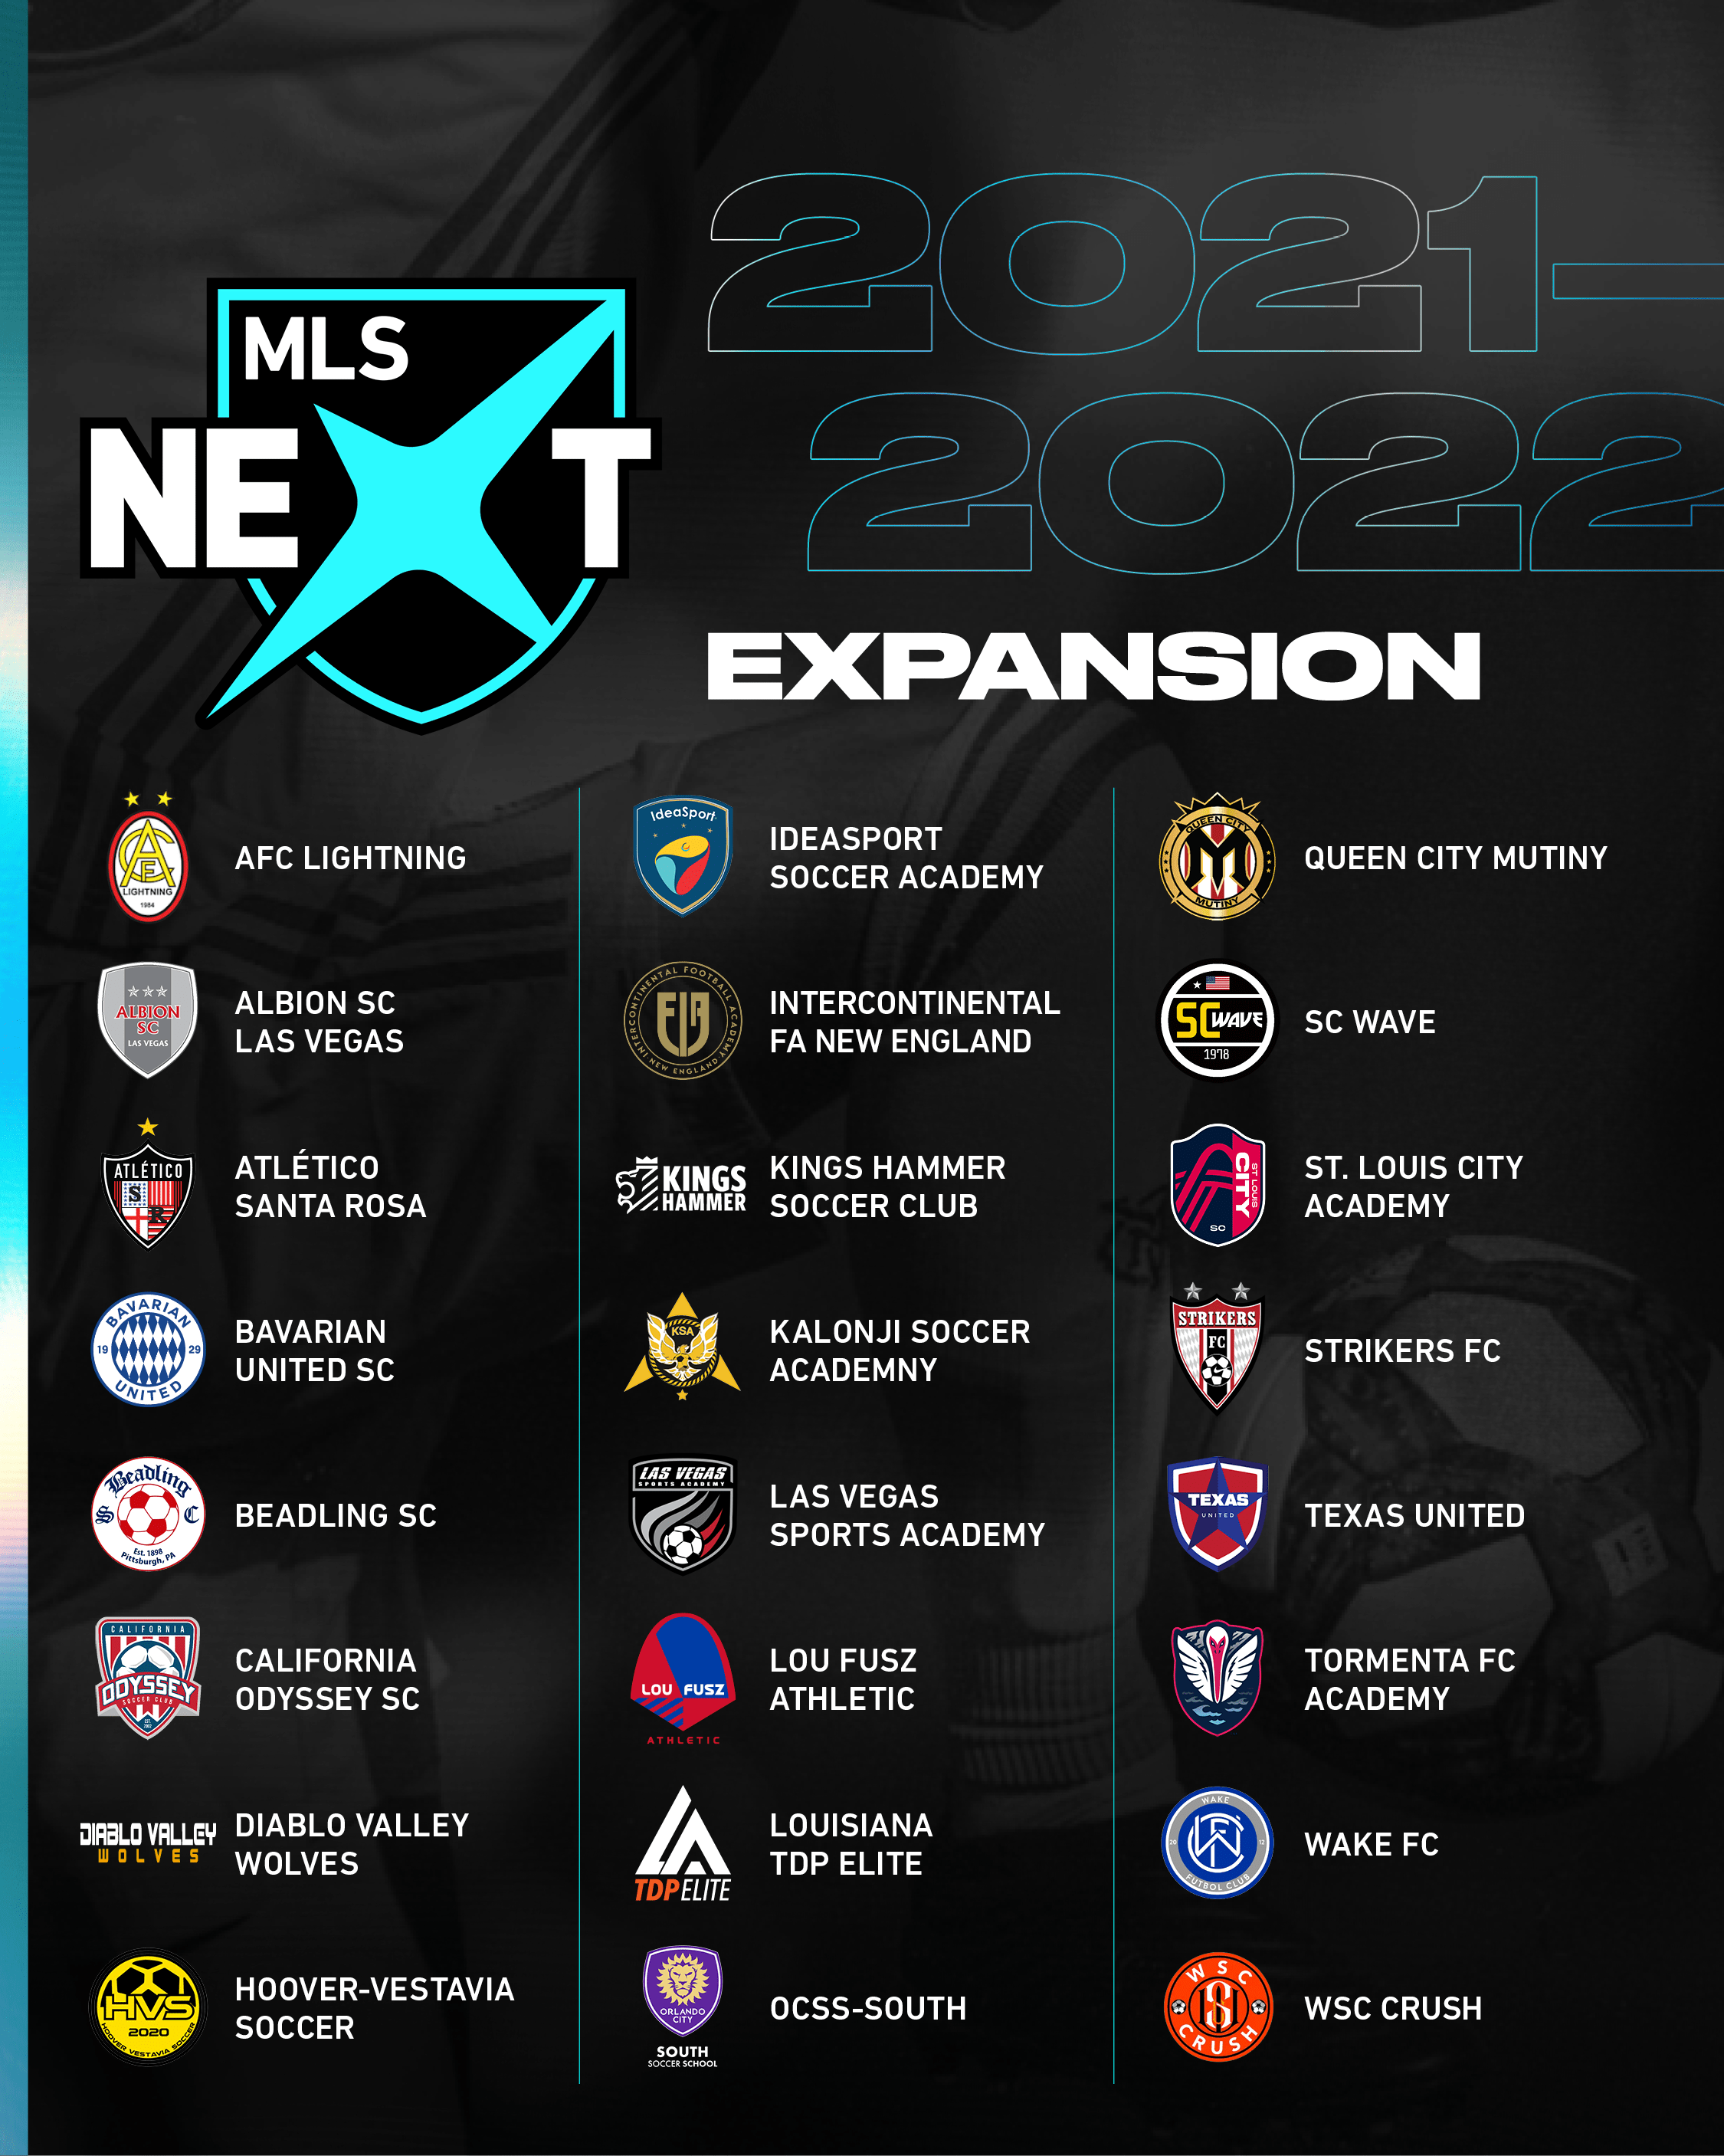 Mls Playoff Schedule 2022 Mls Next Completes Strategic Expansion Ahead Of 2021-2022 Season |  Mlssoccer.com